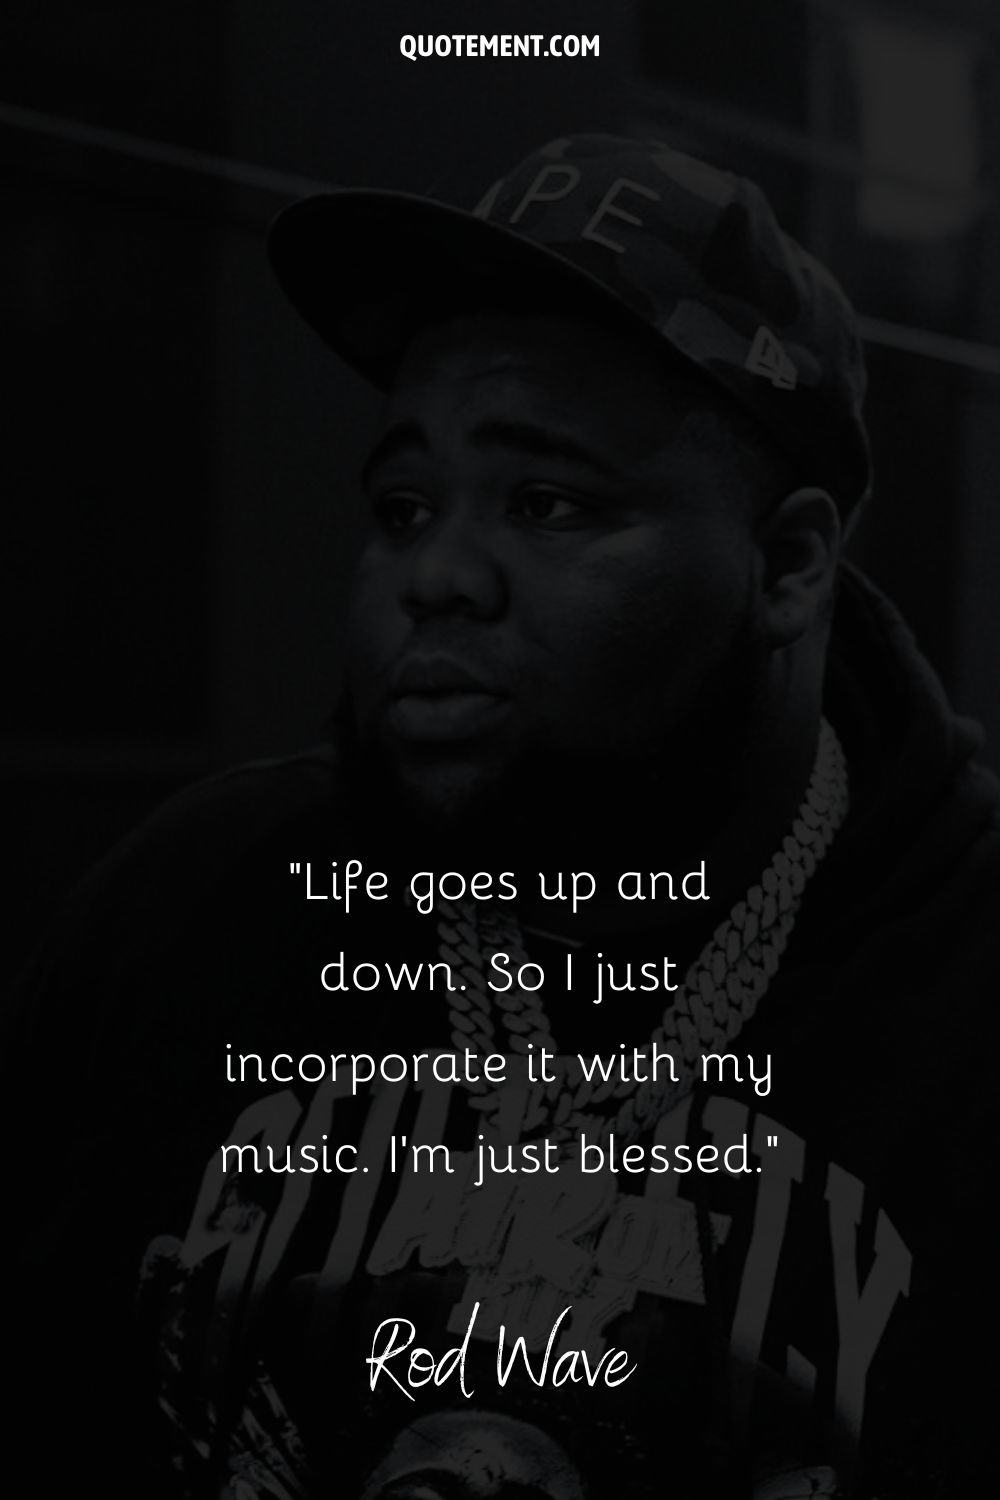 “Life goes up and down. So I just incorporate it with my music. I'm just blessed.” — Rod Wave